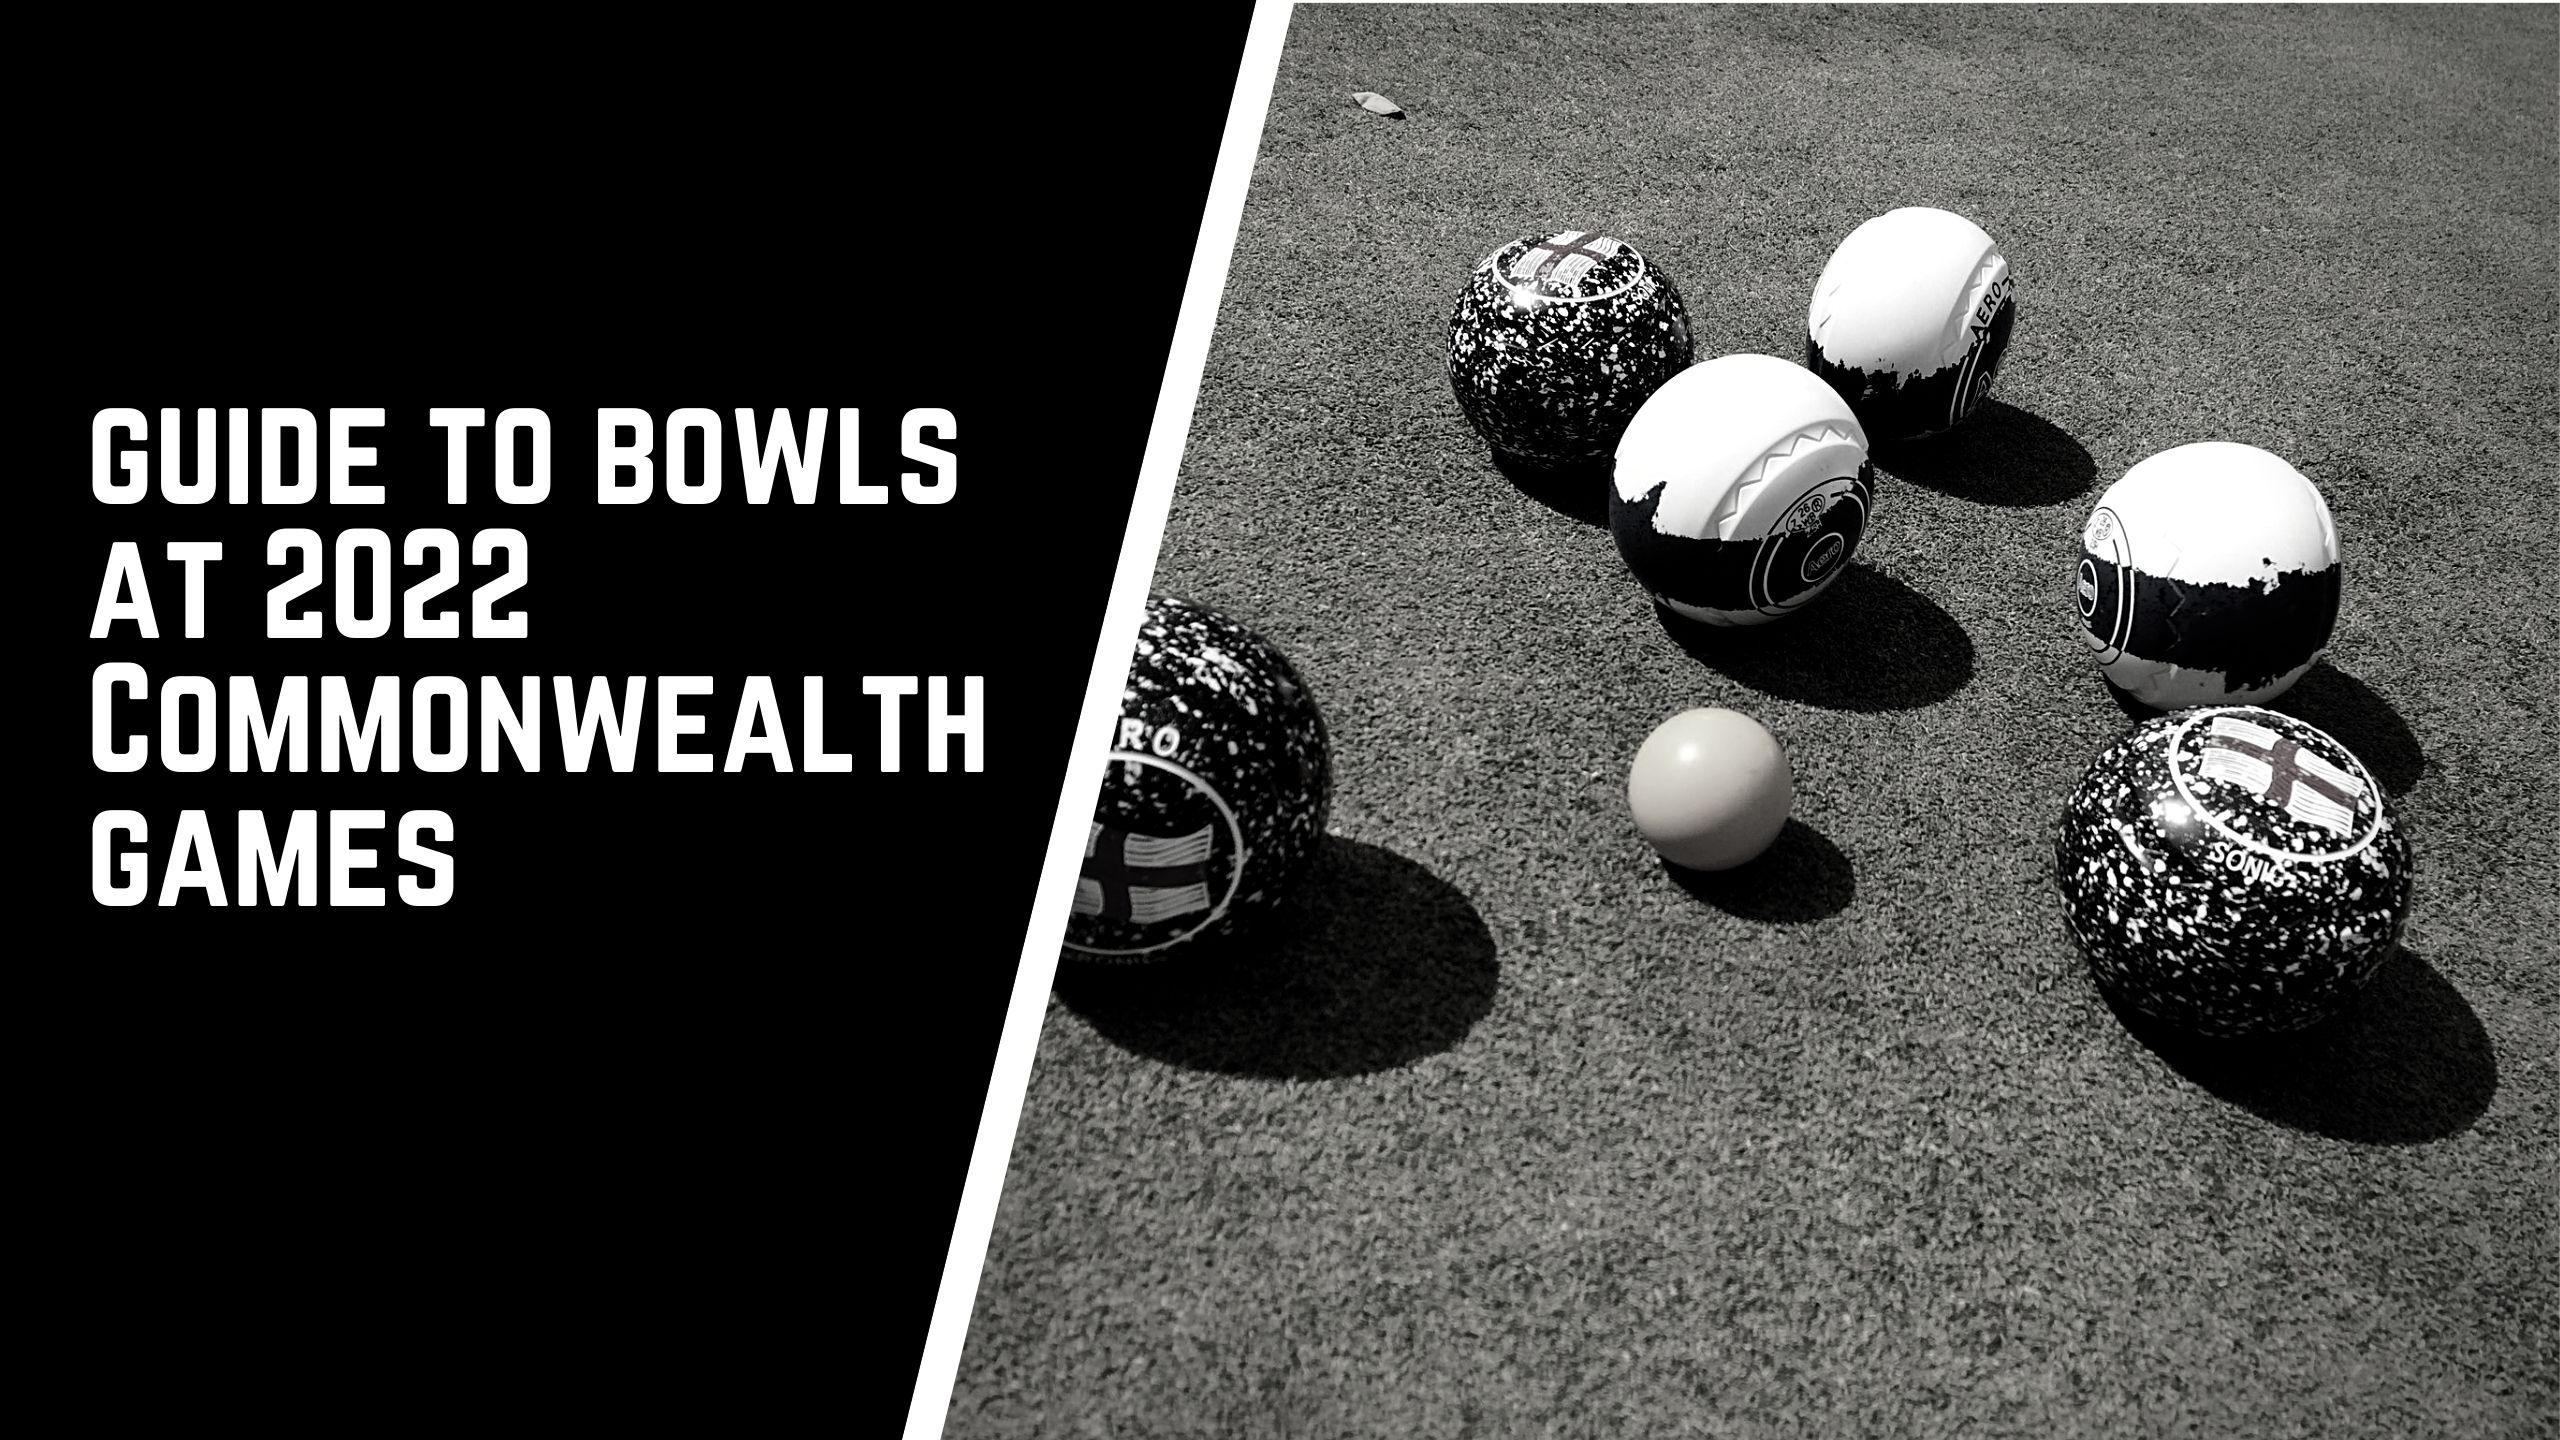 Lawn Bowls At The Commonwealth Games 2022 | A Simple Illustrated Guide